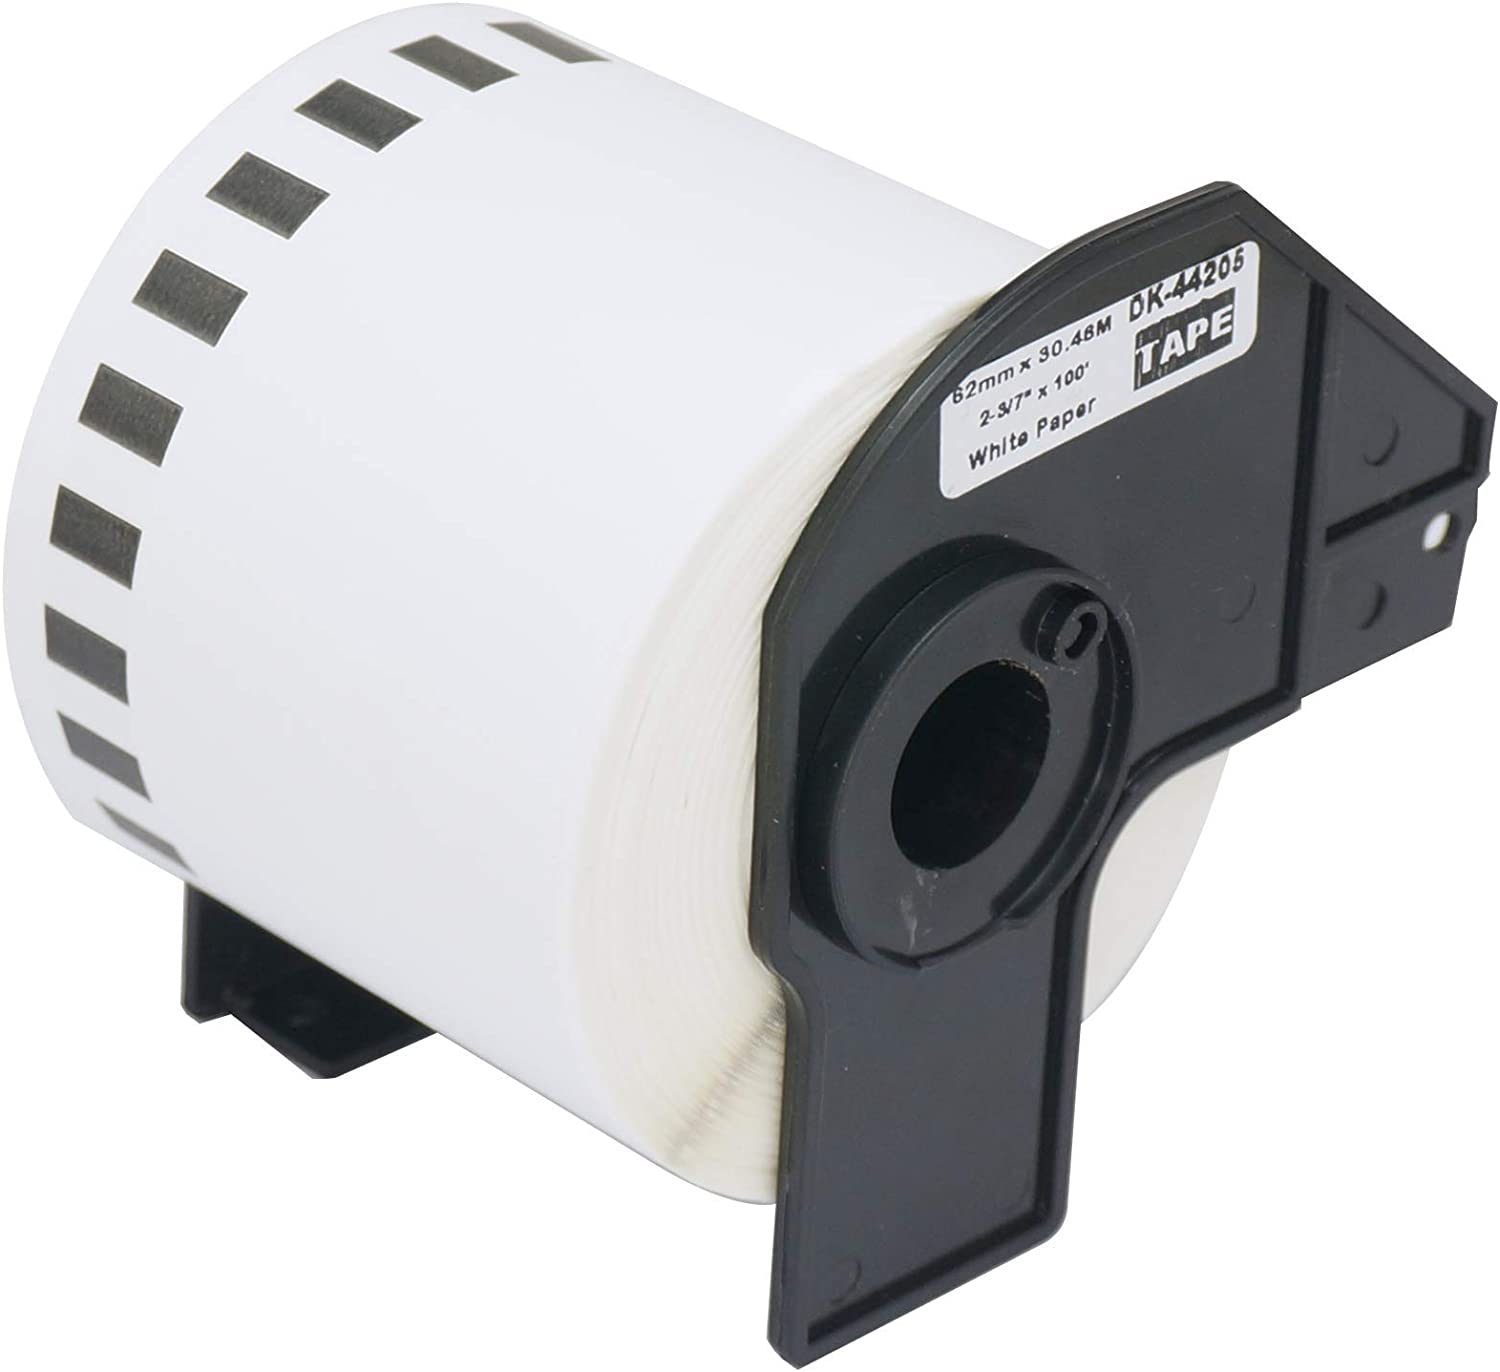 DK-4205 Removable Continuous Labels - 2-3/7'' x 100' - Compatible for Brother P-Touch Printer